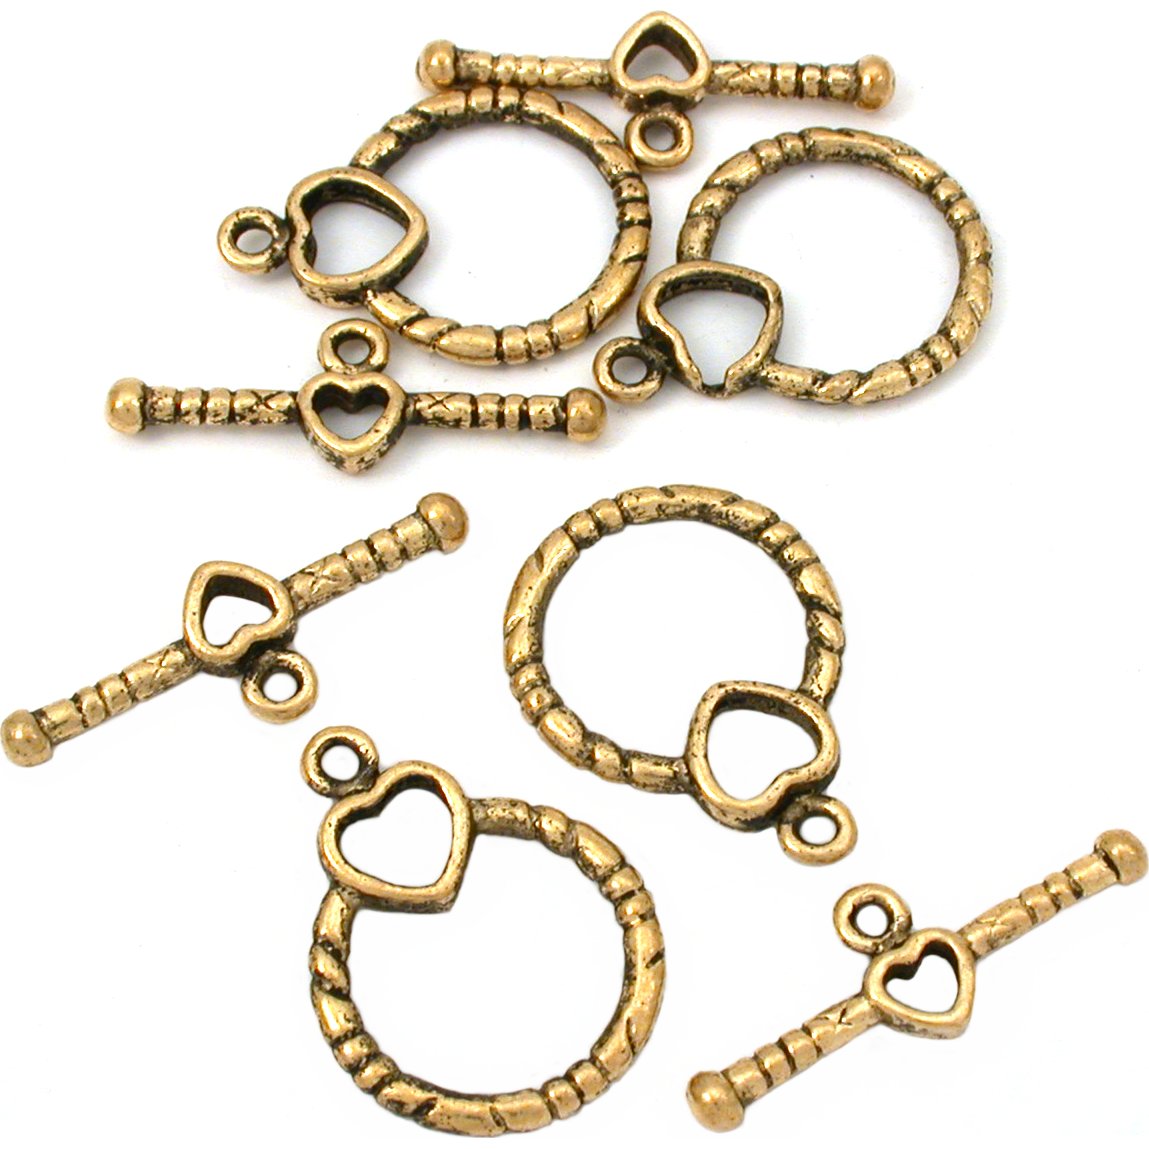 Bali Gold Toggle Clasps Gold Plated Claps for Bracelets, Real Gold